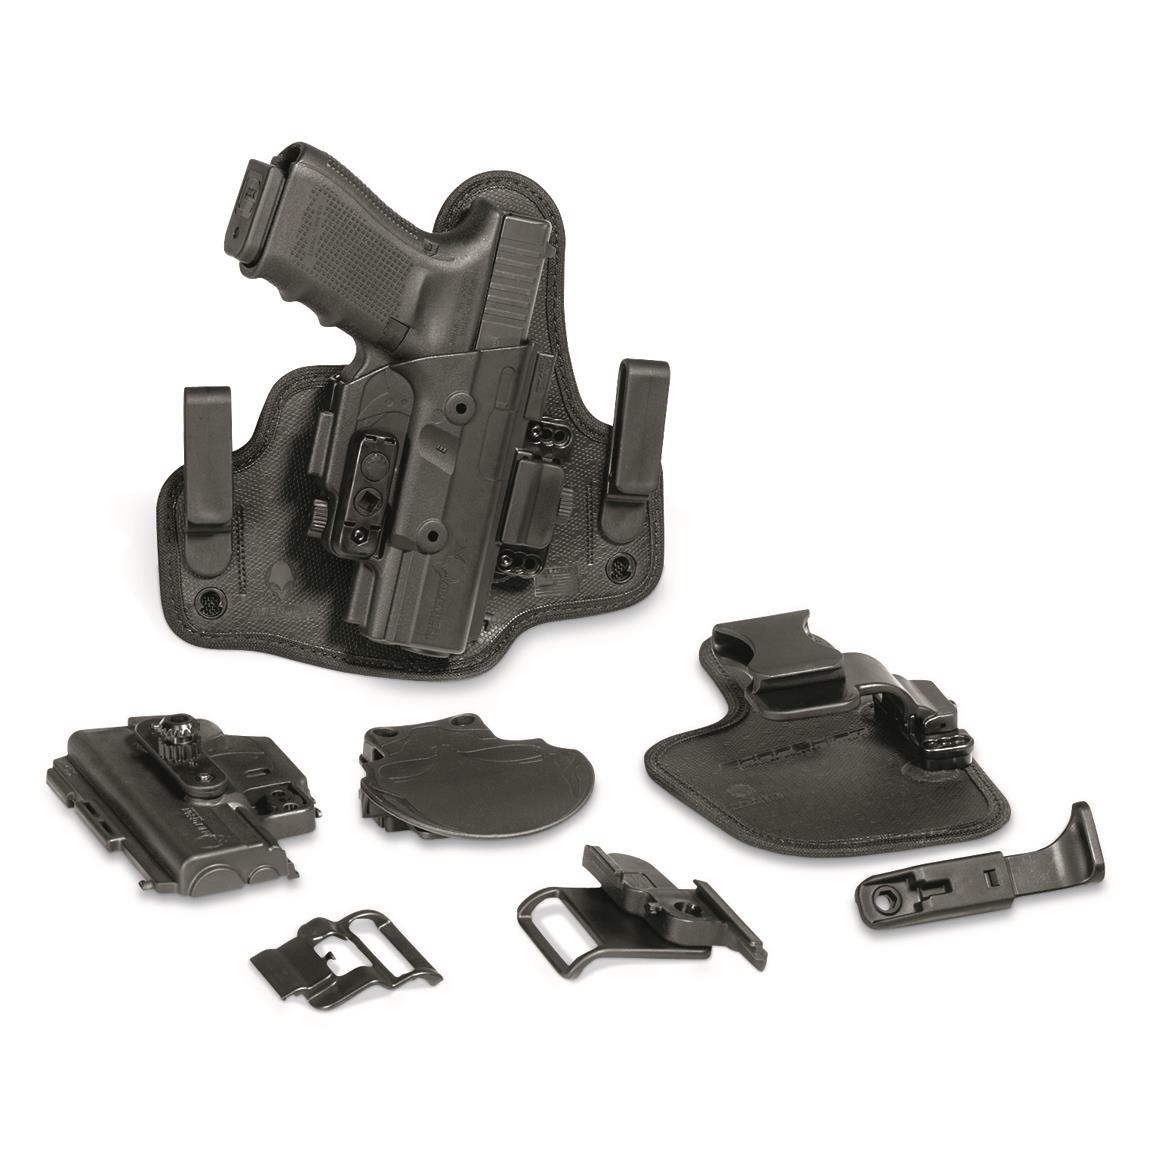 Alien Gear ShapeShift Holster Core Carry Pack, Springfield XDS 3.3"